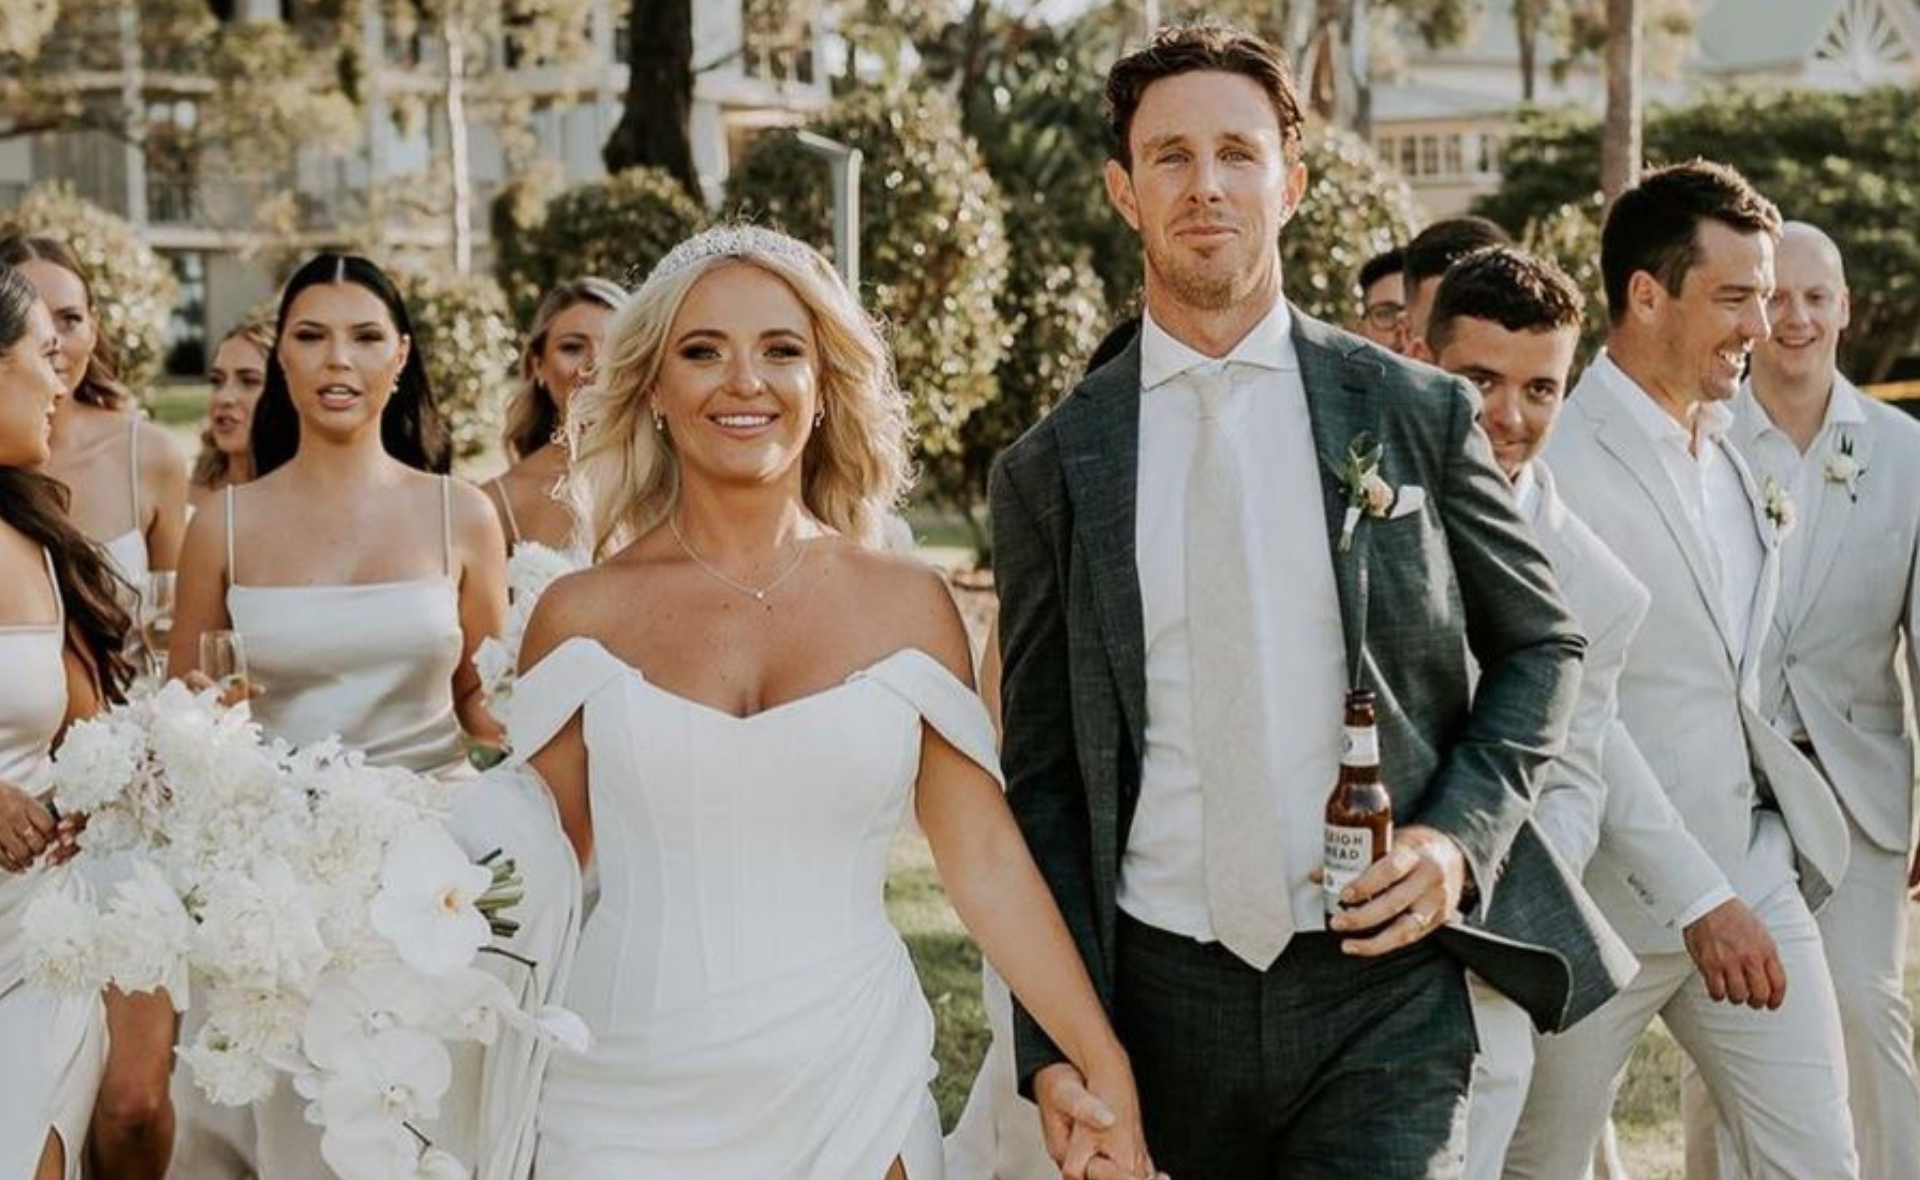 The Block’s Dylan and Jenny have finally said “I do” in a stunning Gold Coast wedding ceremony